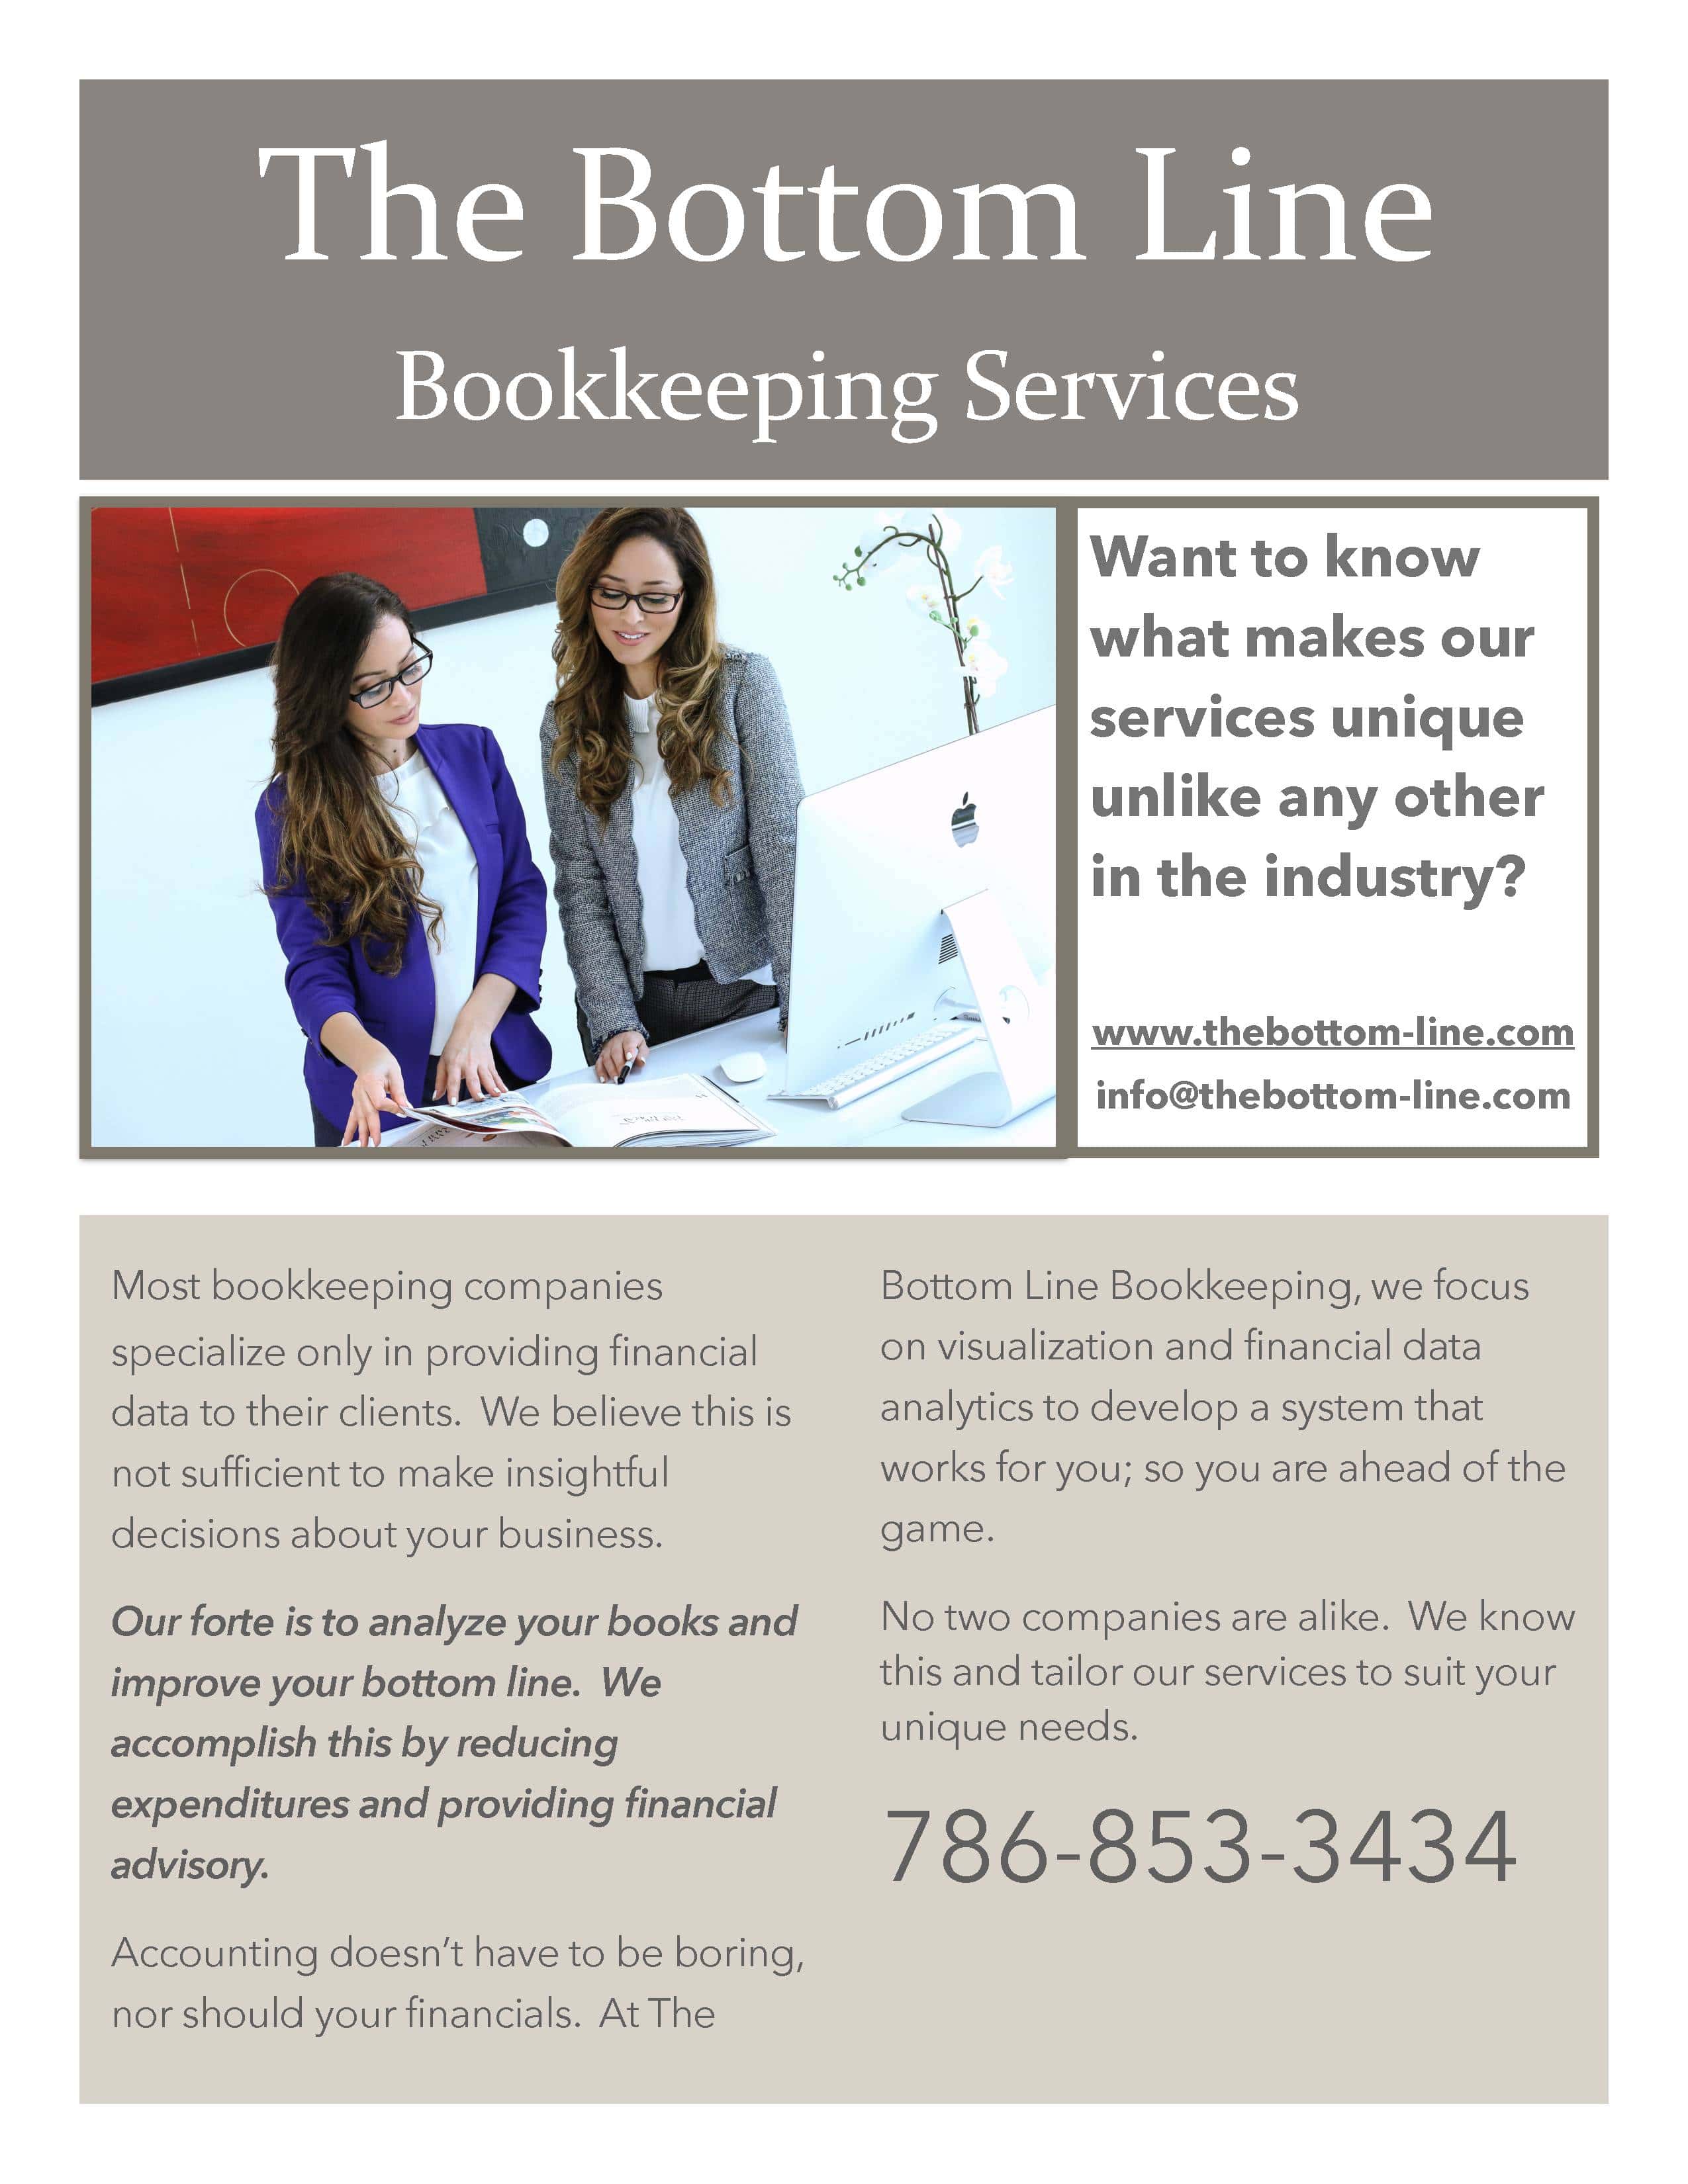 The Bottom Line, Bookkeeping Services LLC - Denver, CO, US, tax services near me